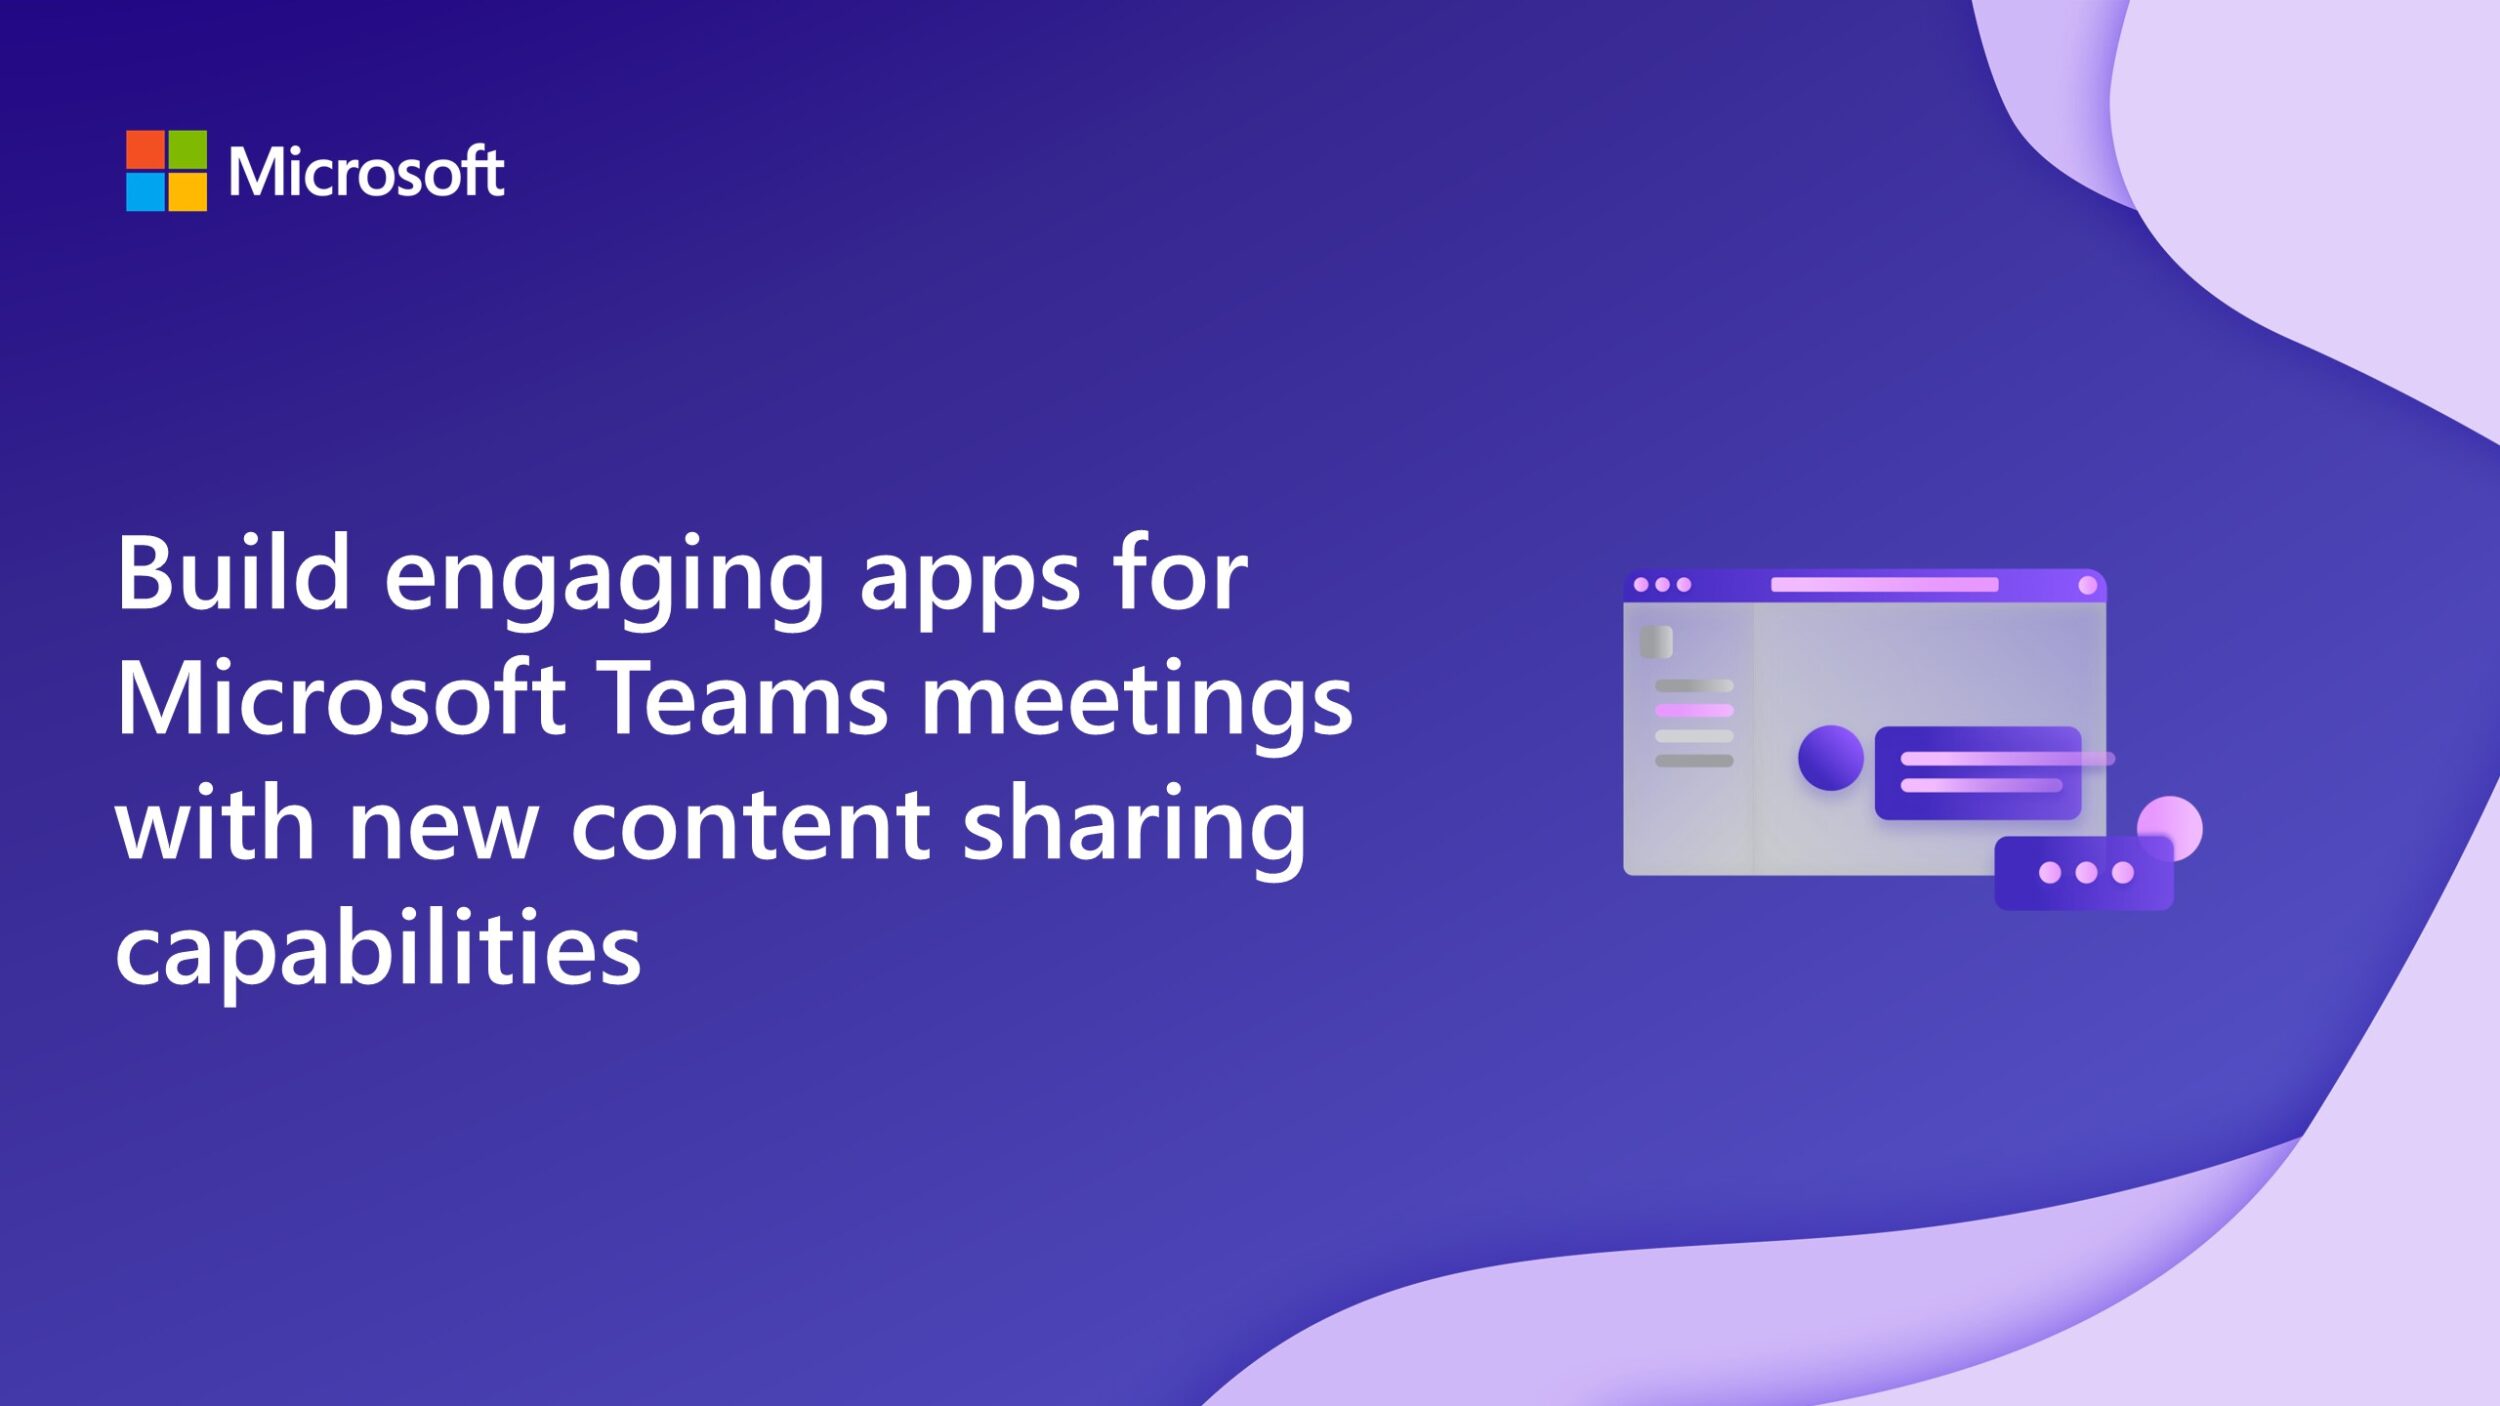 Build engaging apps for Microsoft Teams meetings with new content sharing capabilities